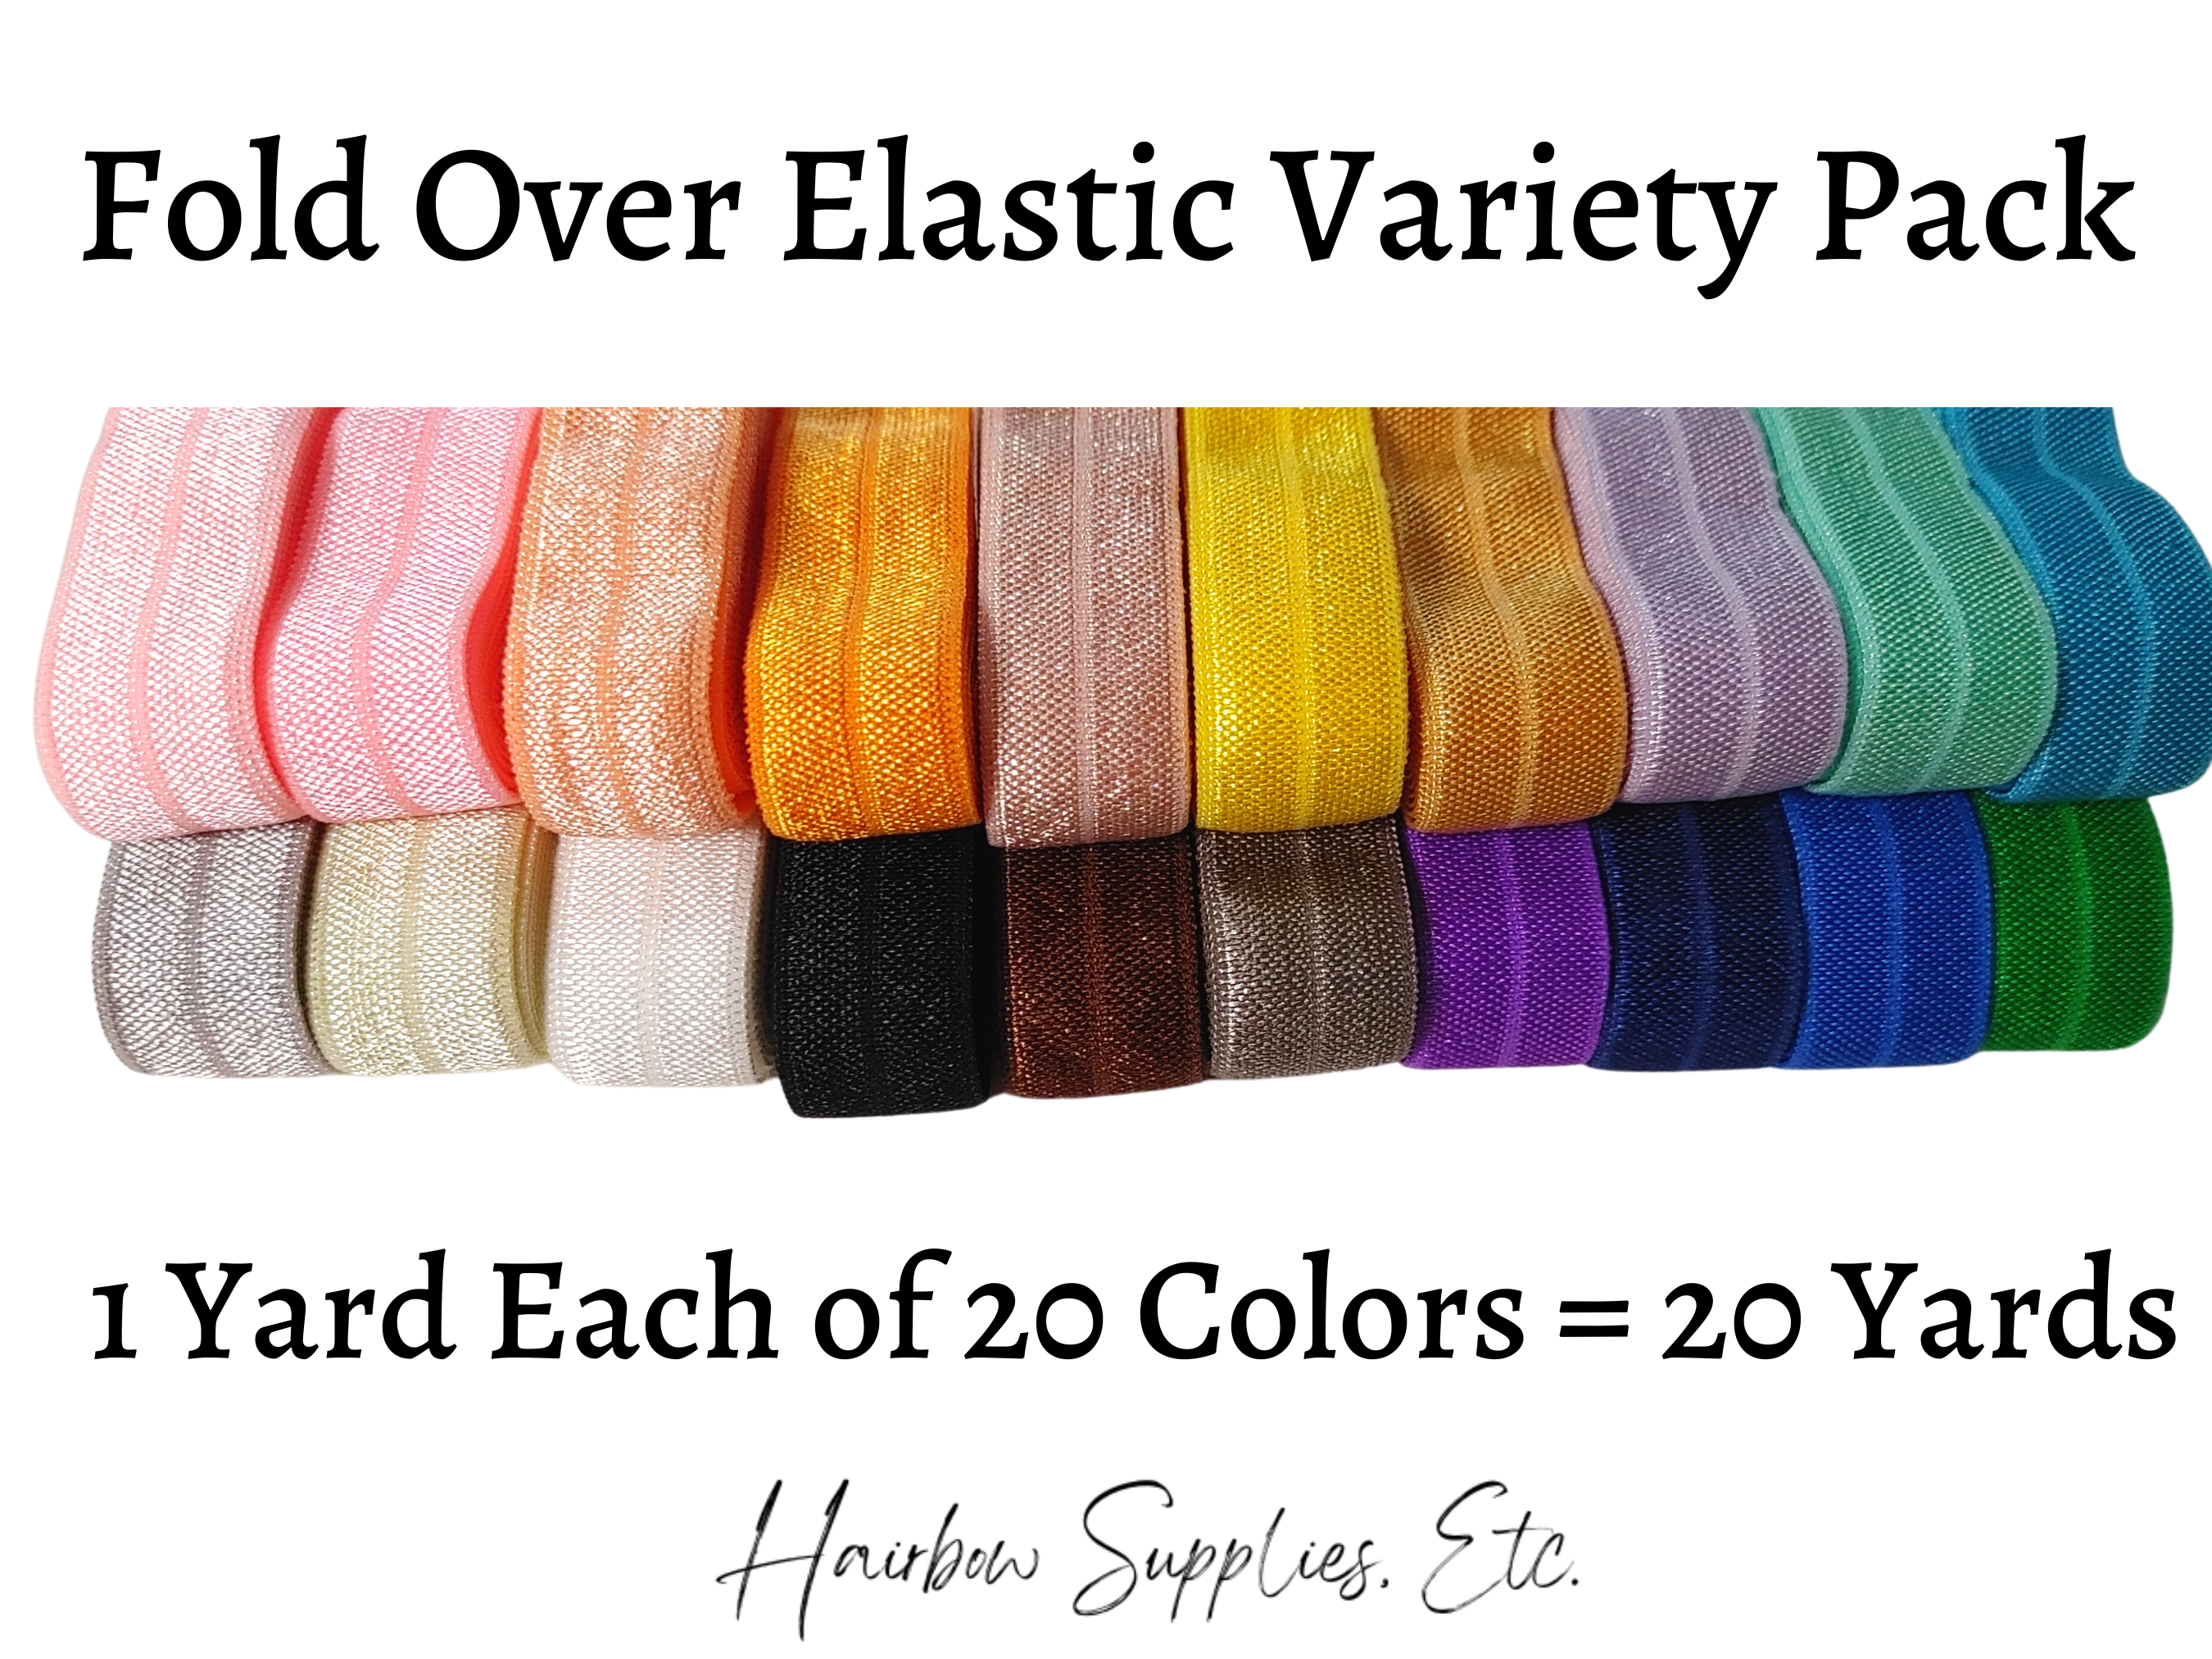 Solid Fold Over Elastic Variety Pack 5/8 inch 20 yd 1 yard Each